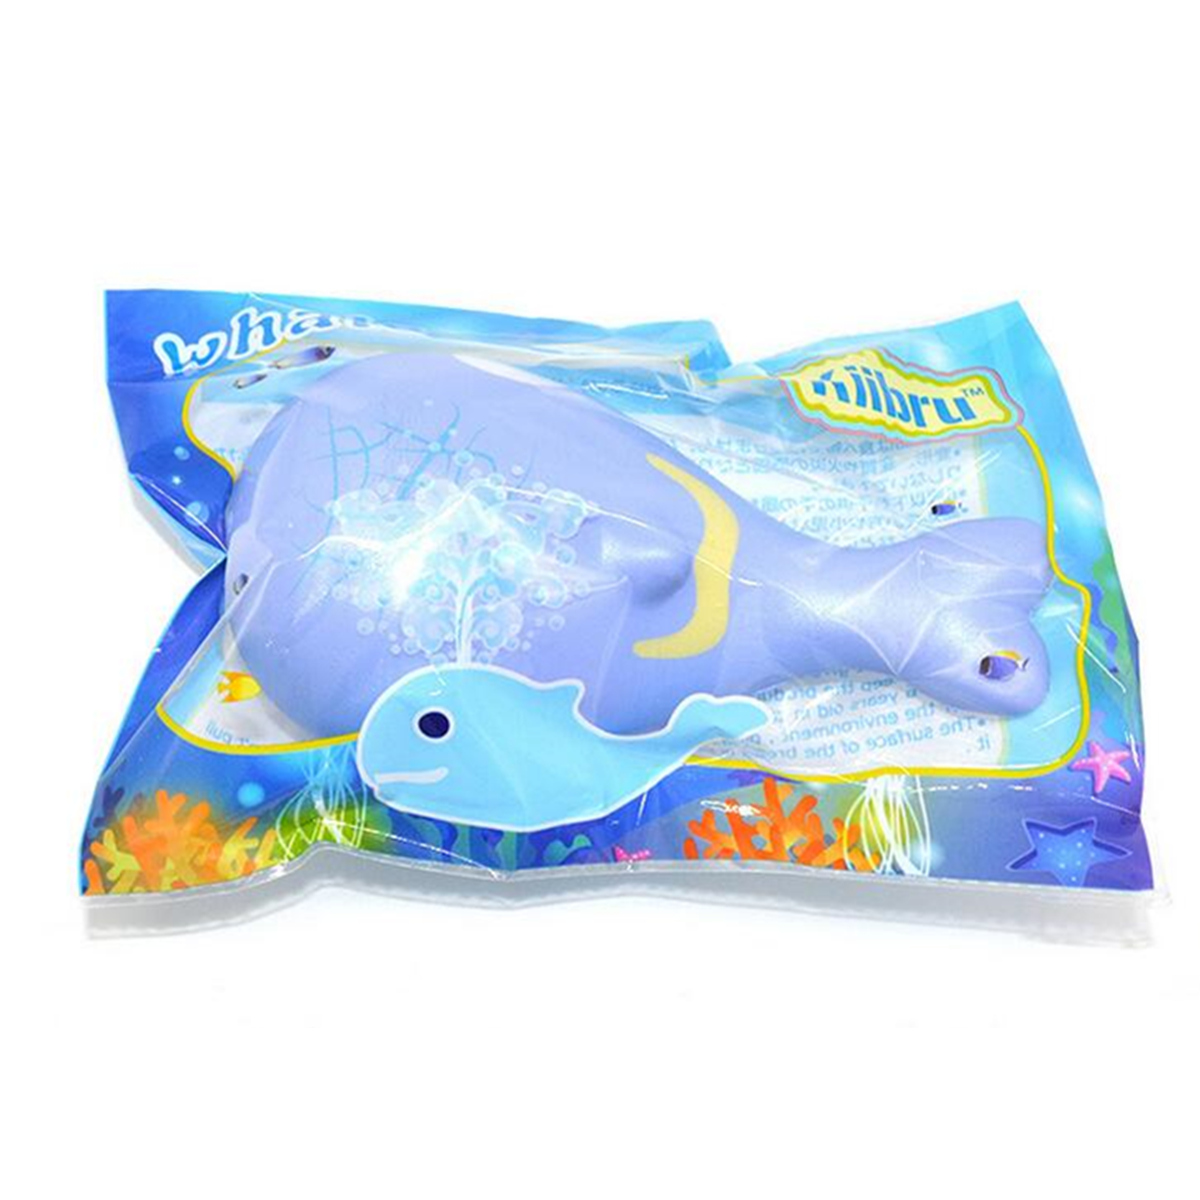 15cm-Whale-Squishy-Slow-Rising-Pressure-Release-Soft-Toy-With-Keychains-for-Iphone-Samsung-Xiaomi-1145805